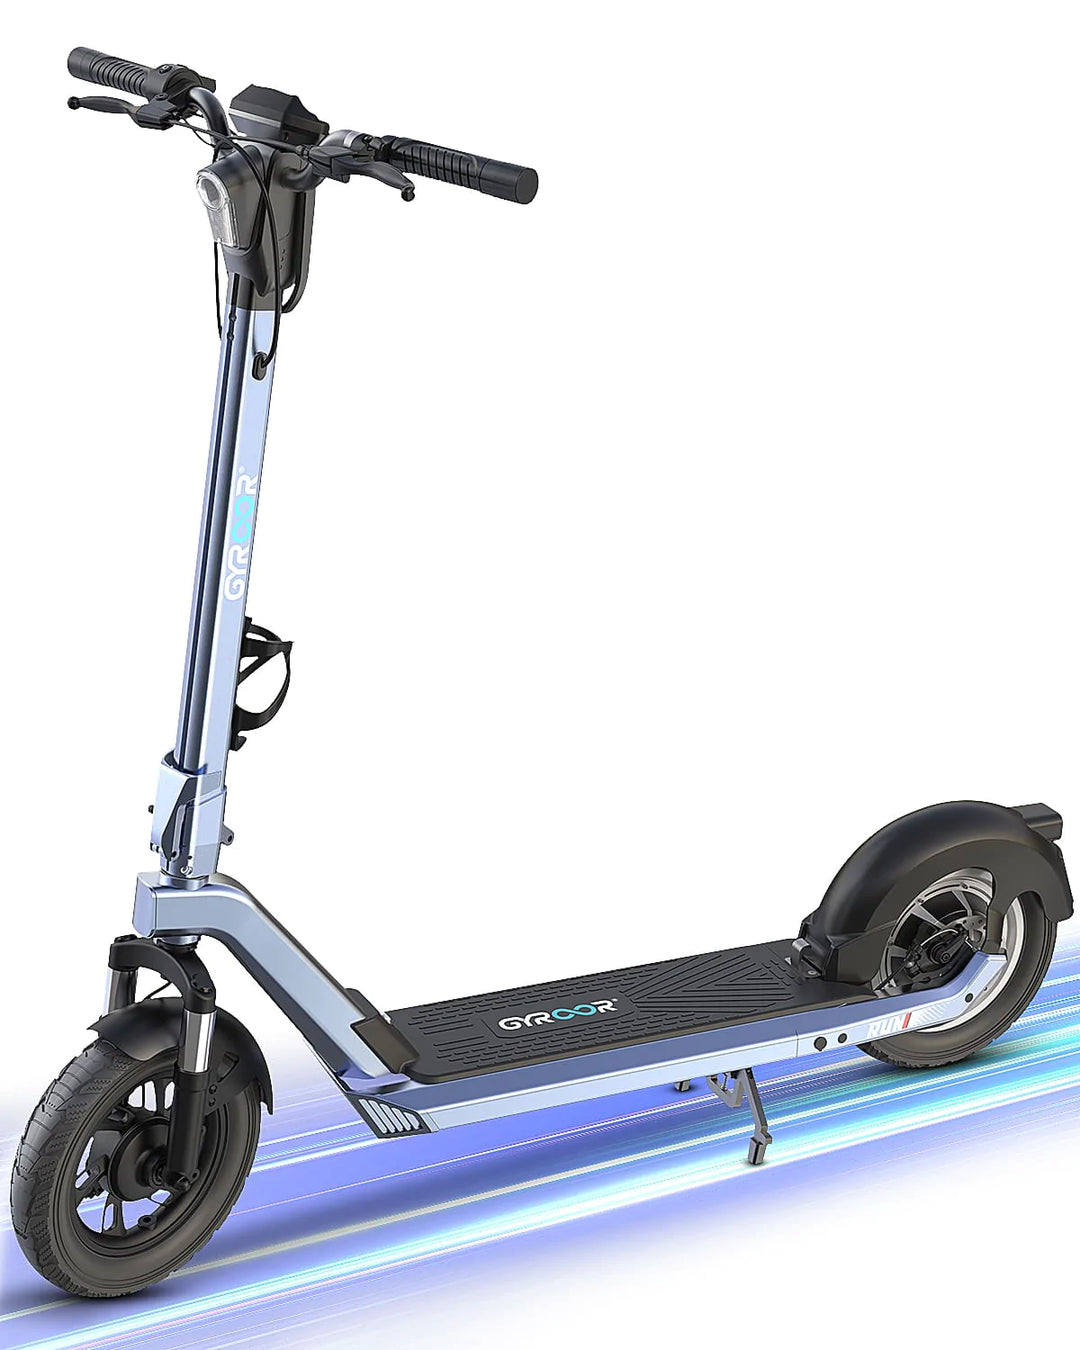 Gyroor X3 electric scooter